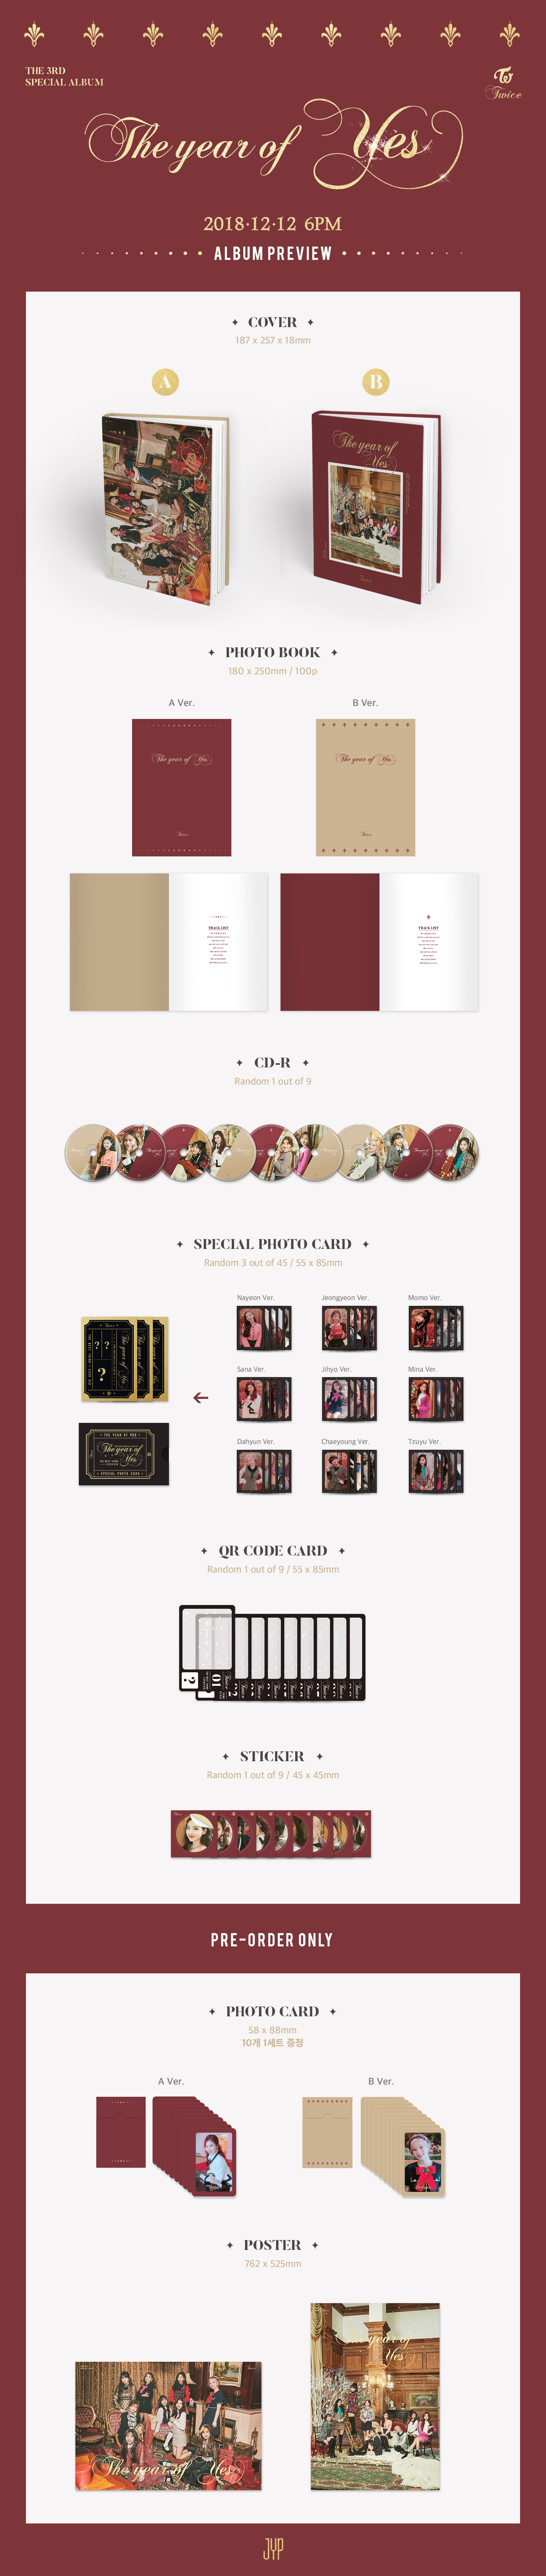 TWICE - The Year Of Yes CD Photobook Infographic